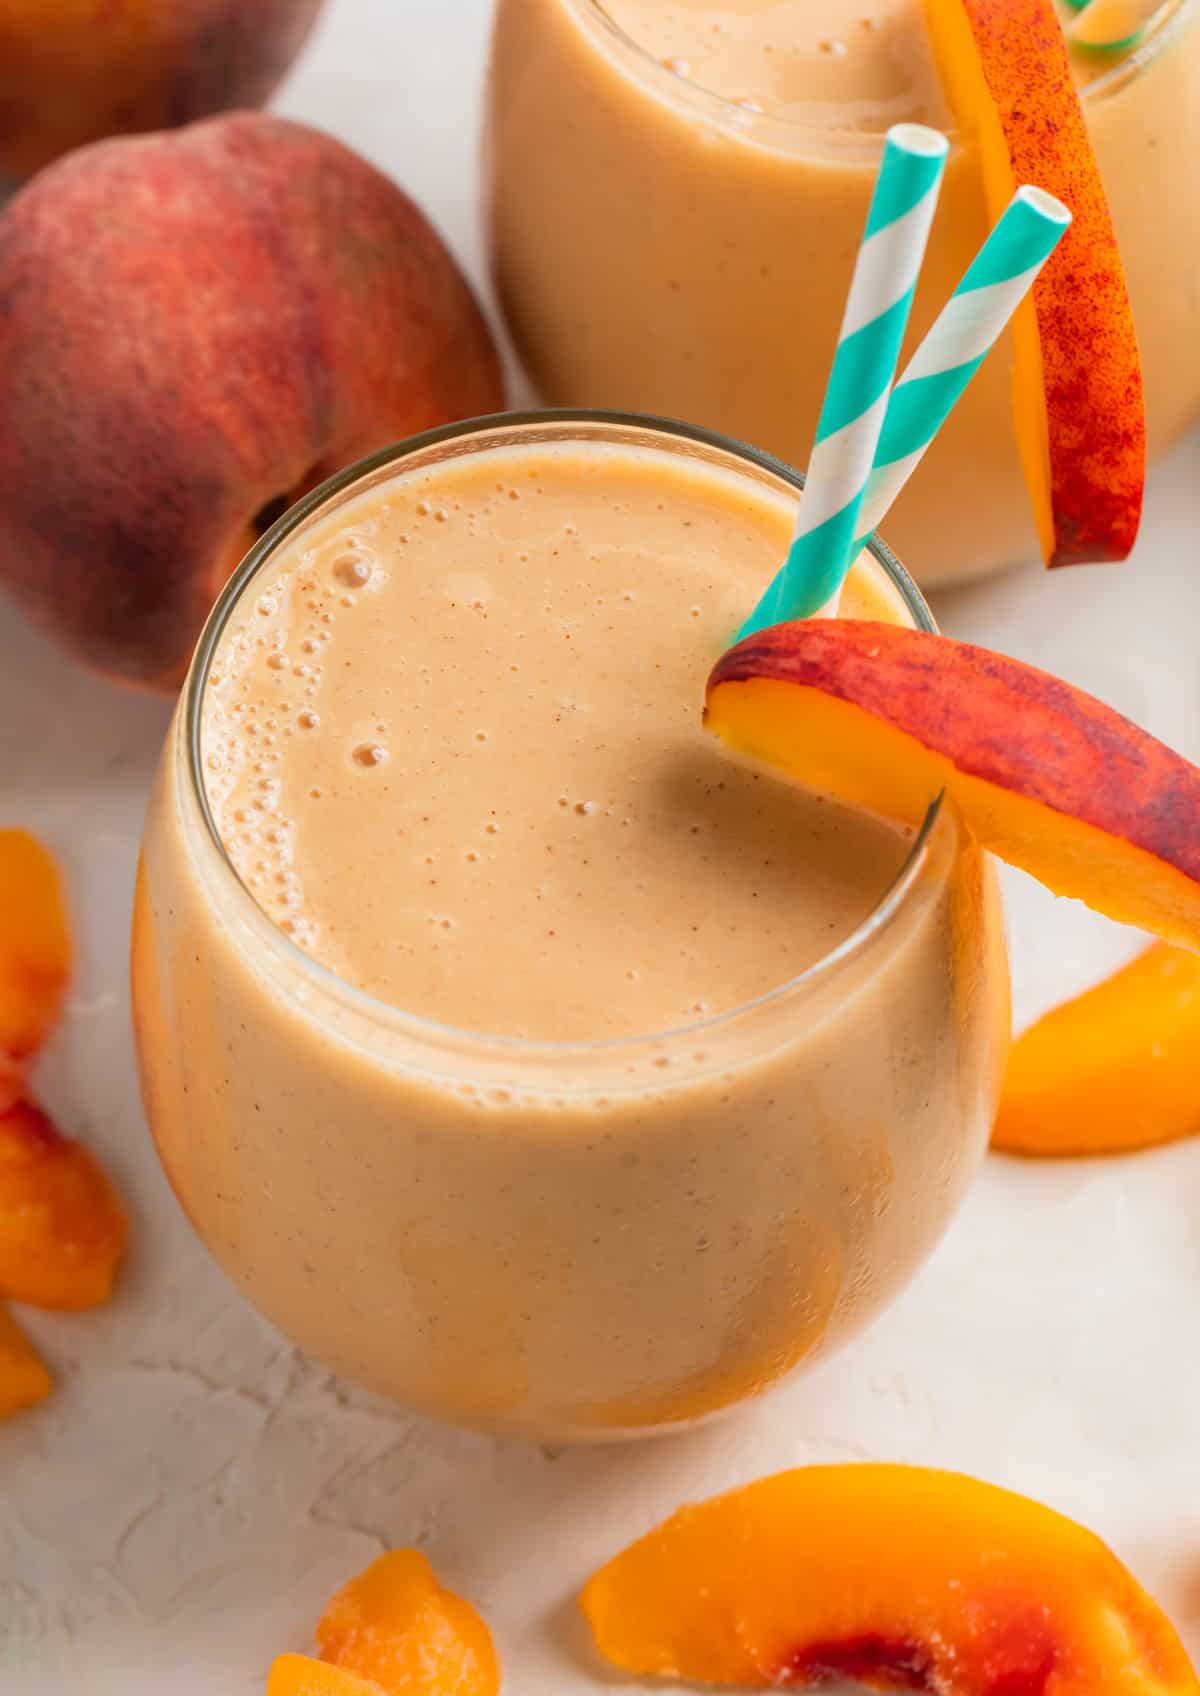 Peach banana smoothie in glass with two straws and peach slice garnish.